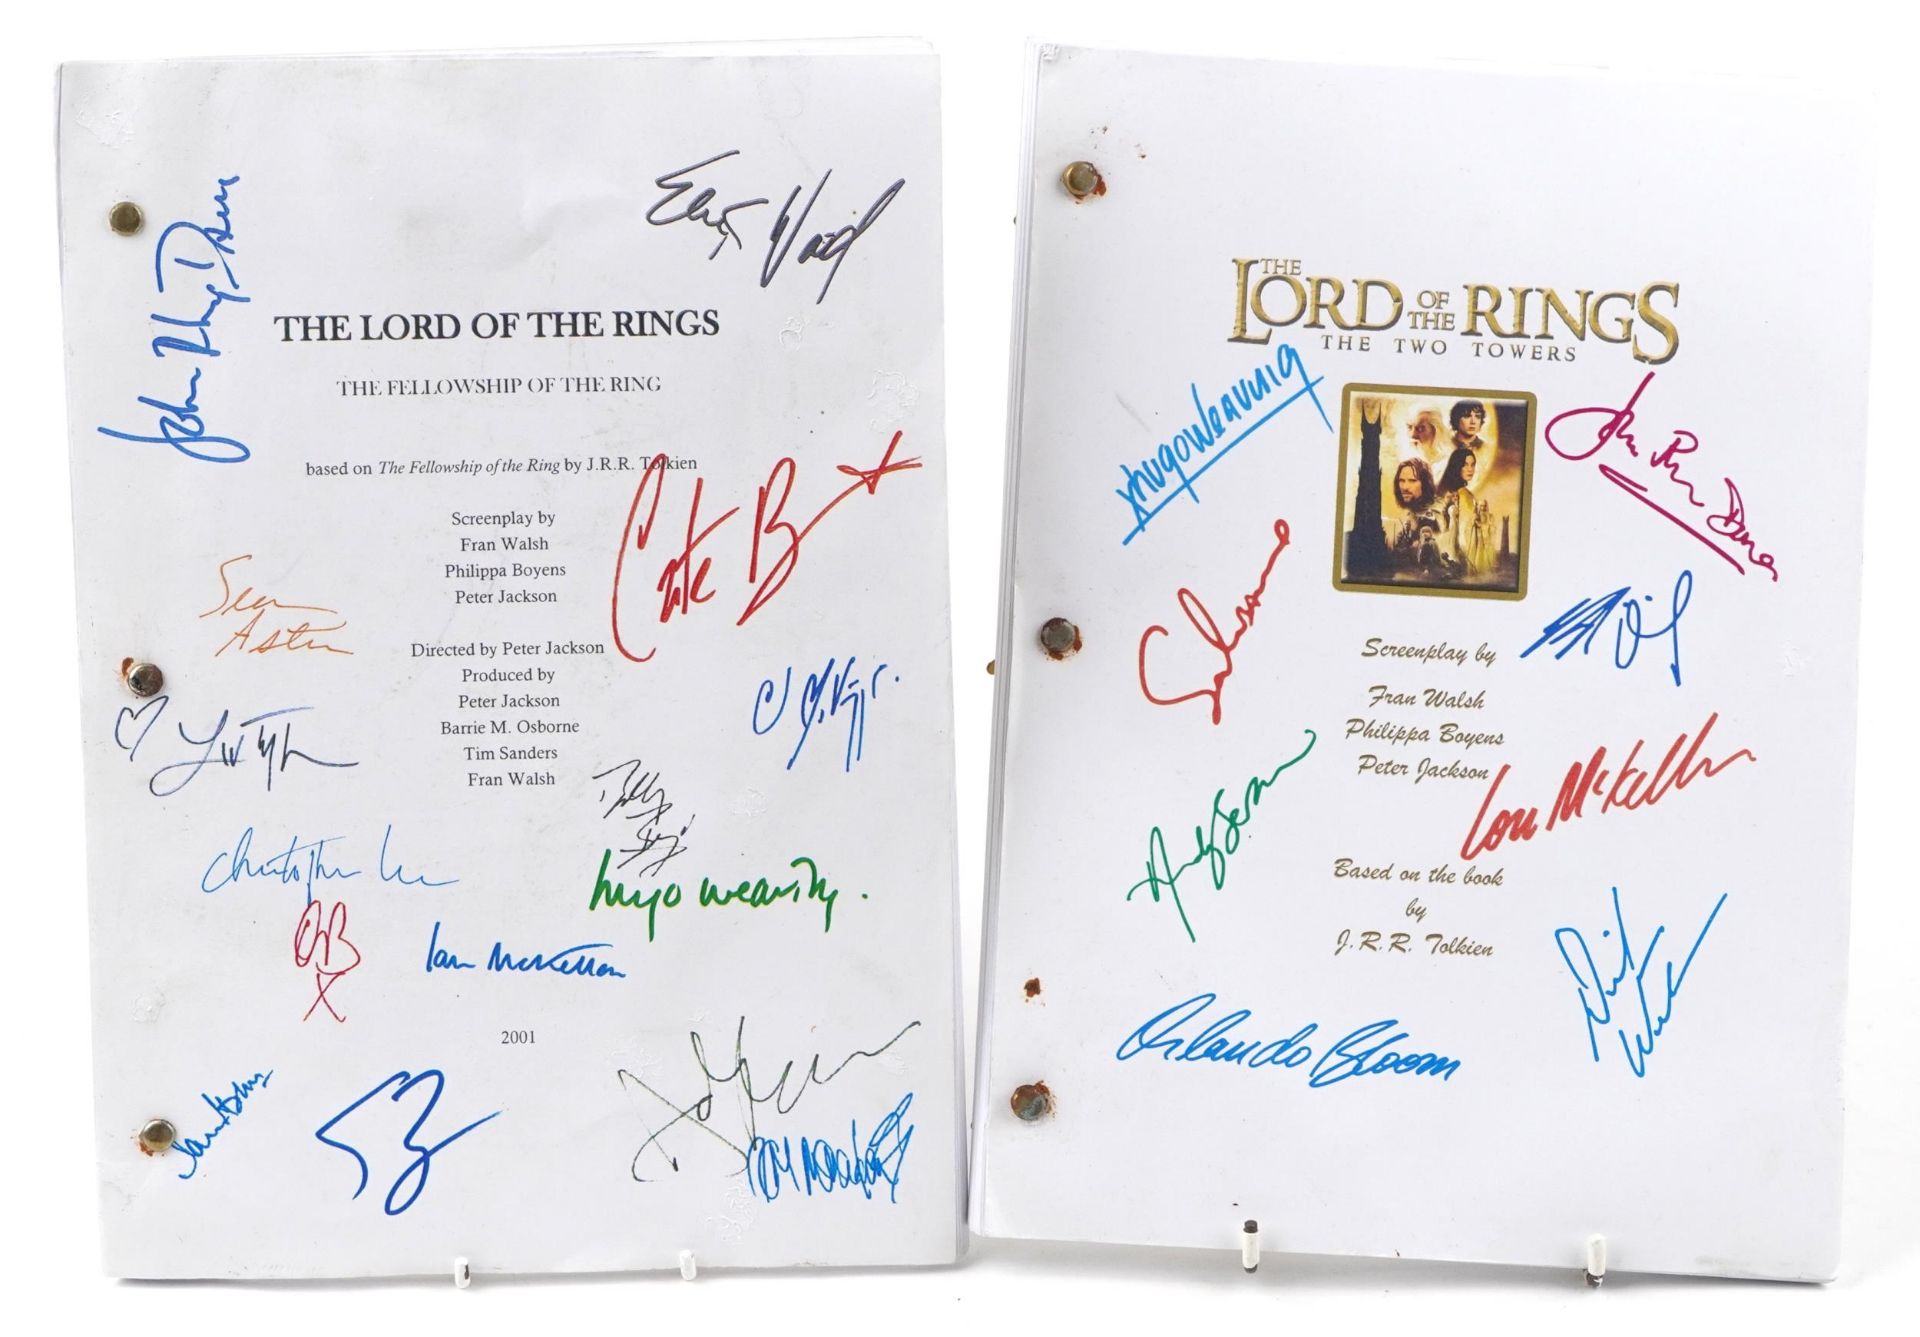 Two Lord of the Rings screenplay scripts comprising The Fellowship of the Ring and The Two Towers